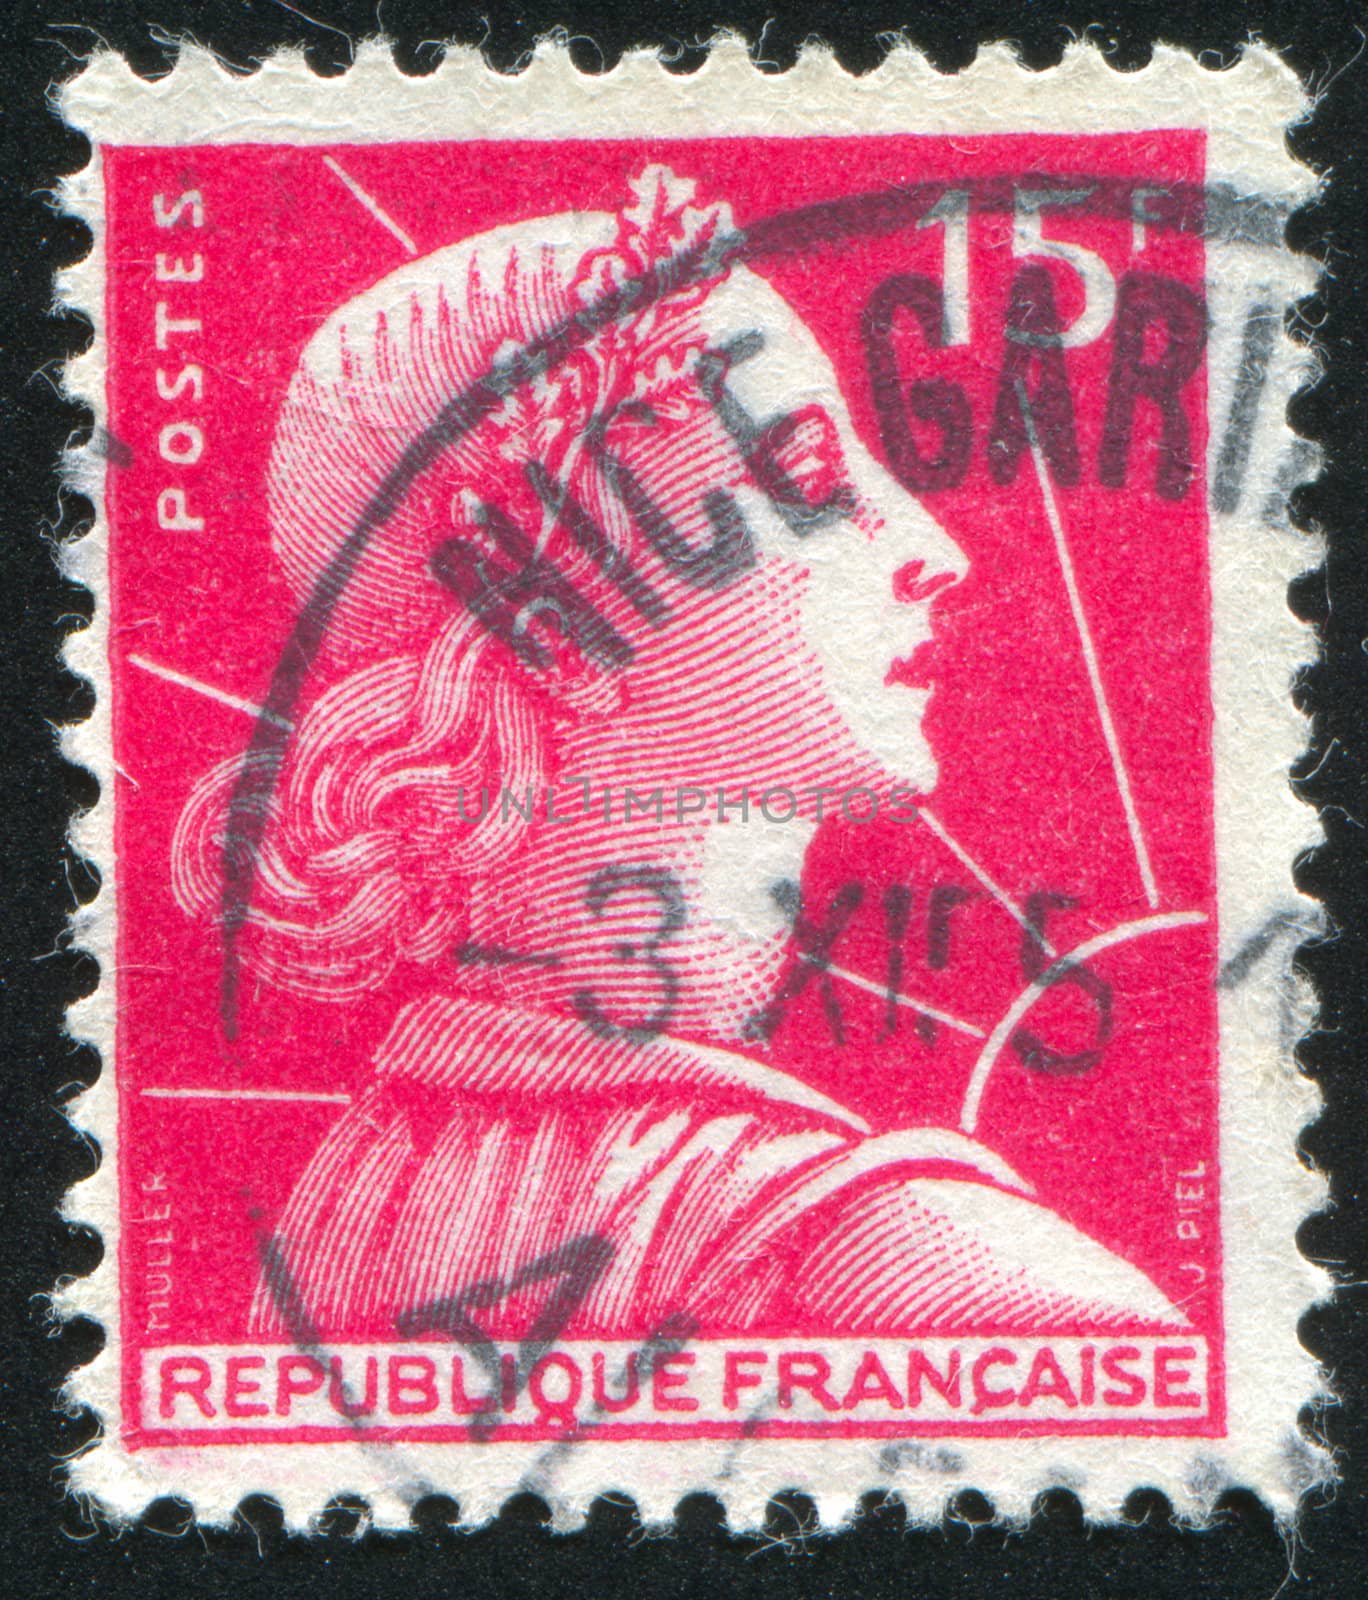 FRANCE - CIRCA 1955: stamp printed by France, shows Marianne, circa 1955